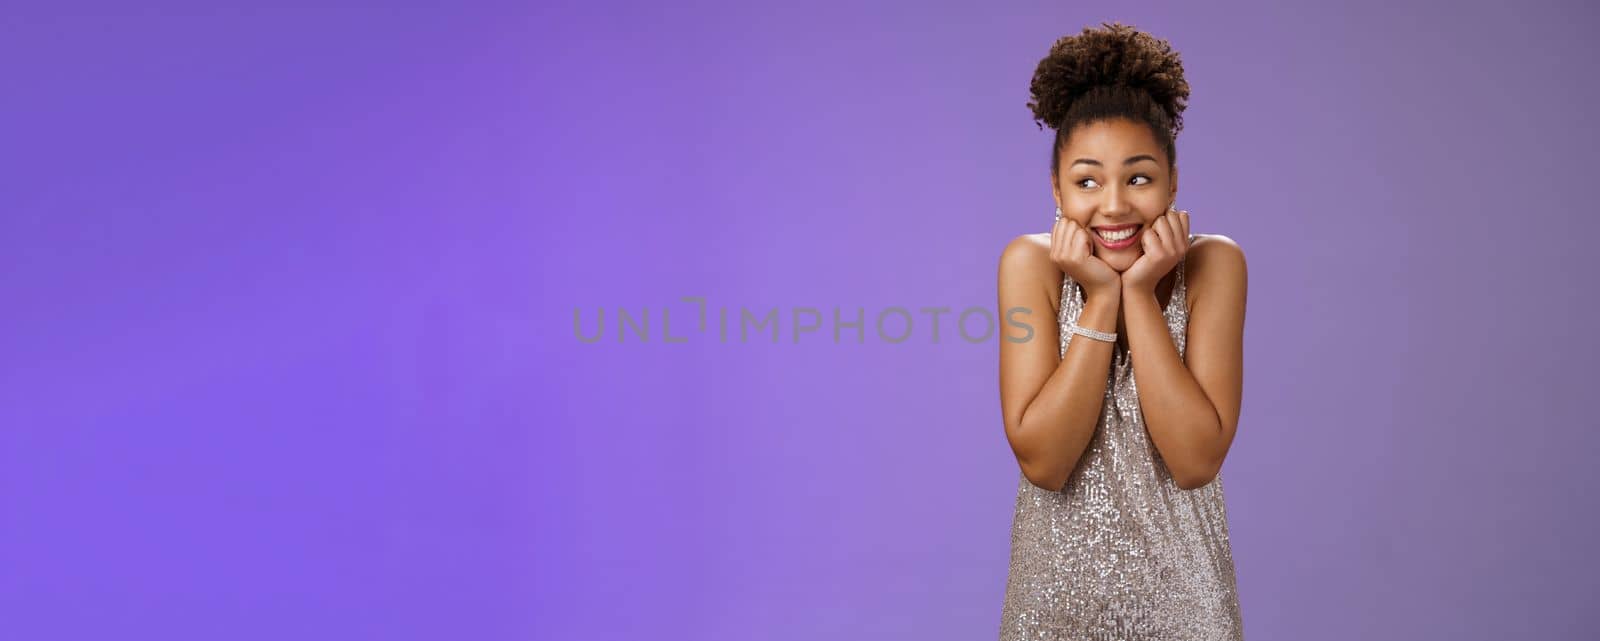 Amused silly cute black girl in silver dress. anticipating exciting party dreamy gaze up touch cheeks smiling broadly optimistic waiting dream come true standing pleased touched blue background.